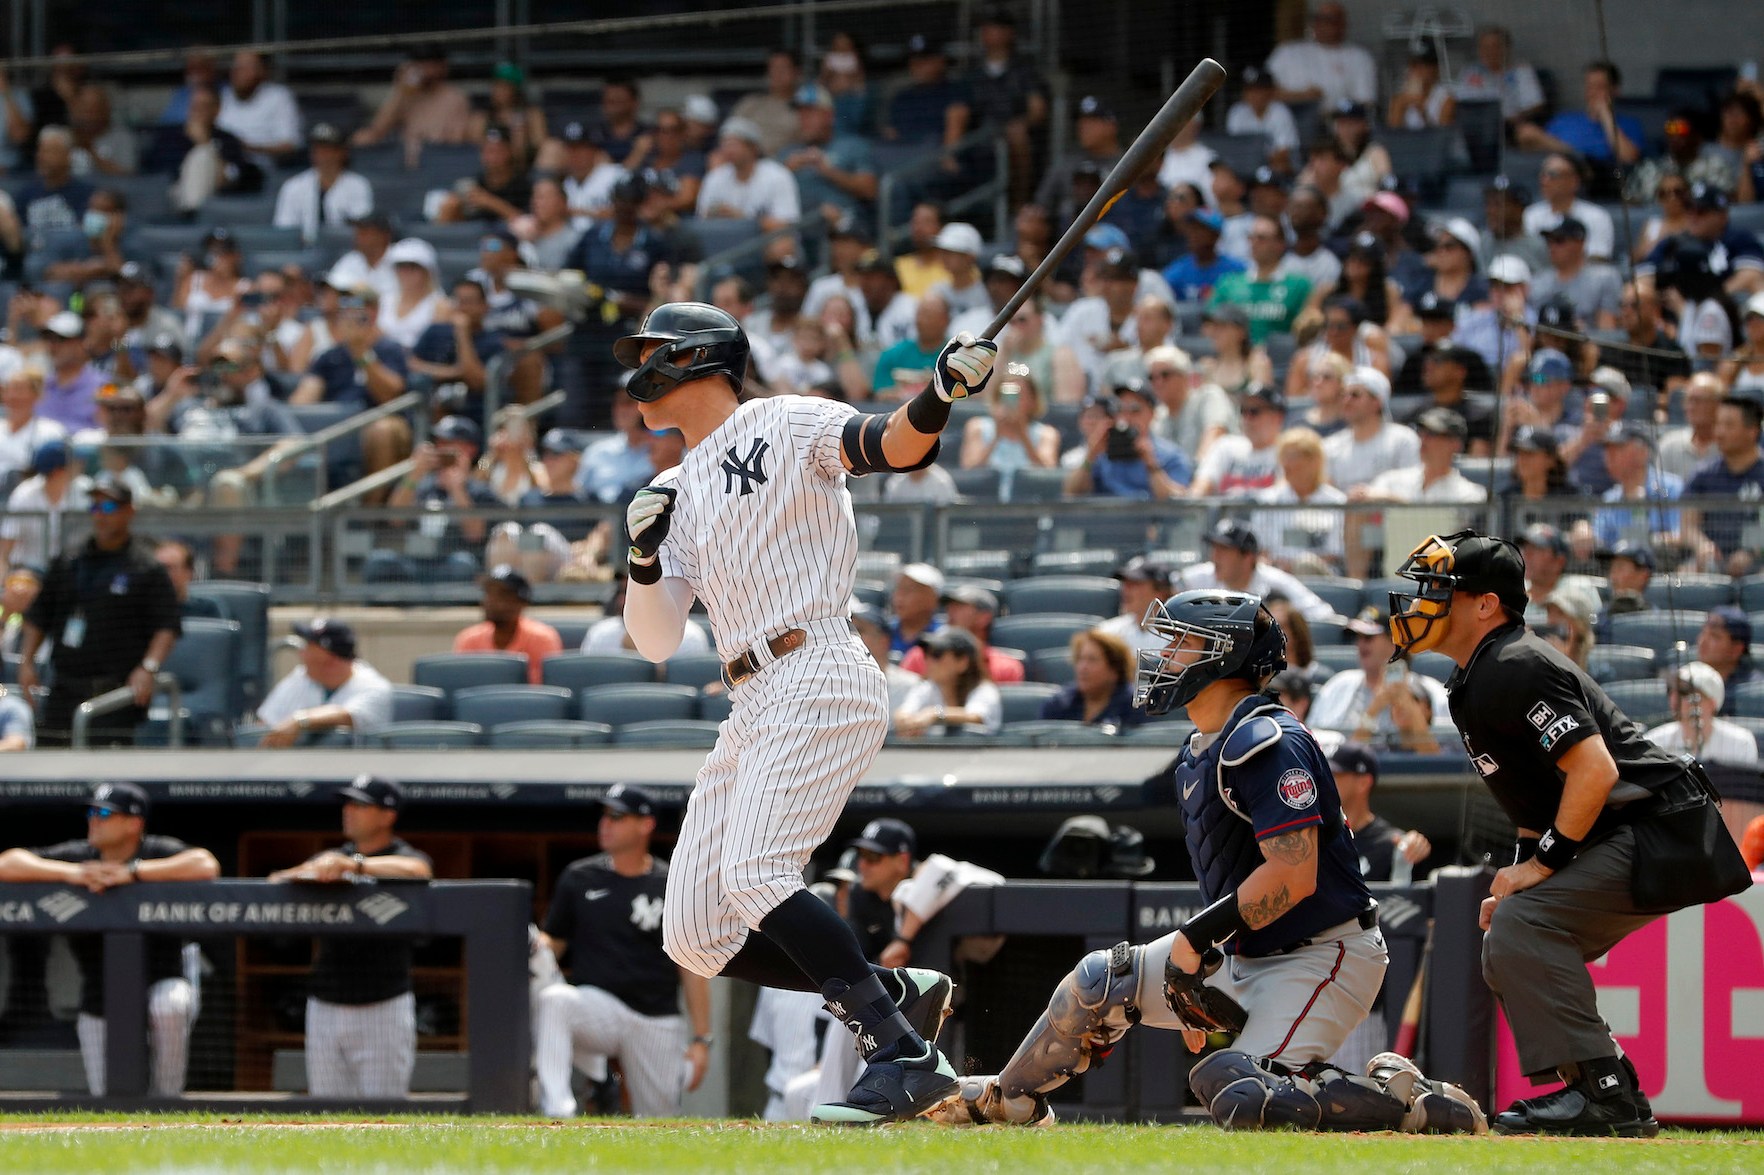 NEW YORK, NEW YORK - SEPTEMBER 05: Aaron Judge #99 of the New York Yankees doubles in the first inning against the Minnesota Twins at Yankee Stadium on September 05, 2022 in the Bronx borough of New York City. (Photo by Jim McIsaac/Getty Images)